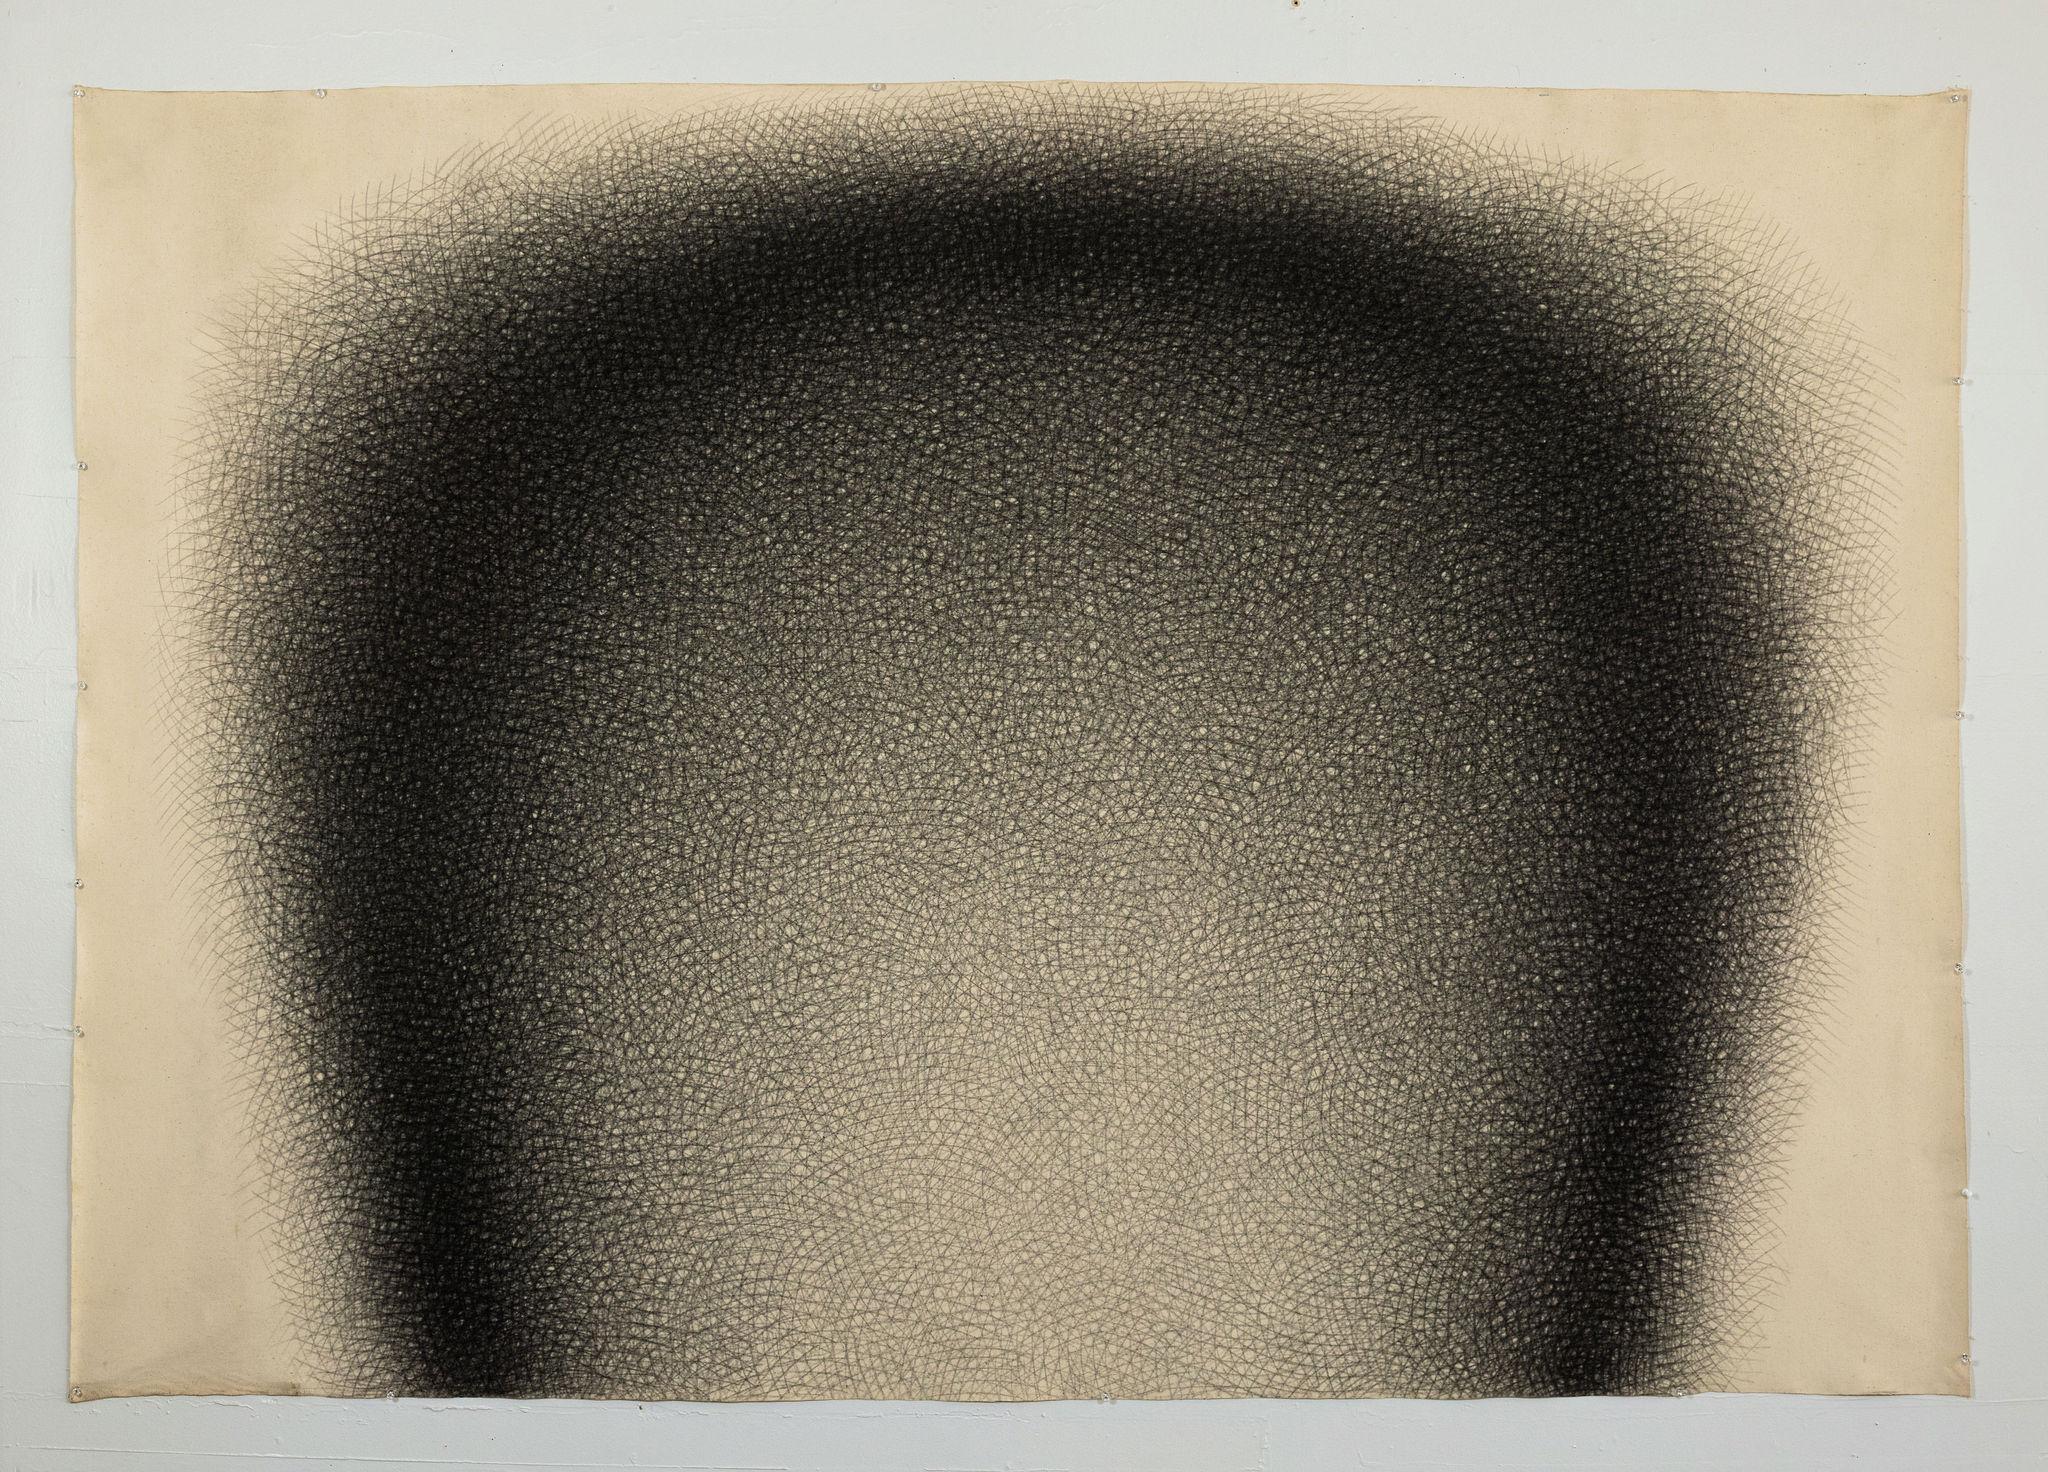 Jack Scott
"Clear Lobe"
1-77
Charcoal on unprimed canvas sprayed with custom fixative
83.25'x57" unstretched
Signed, titled and dated in pencil on reverse

This canvas is a testament to the artist's meticulous craftsmanship and creative vision. The